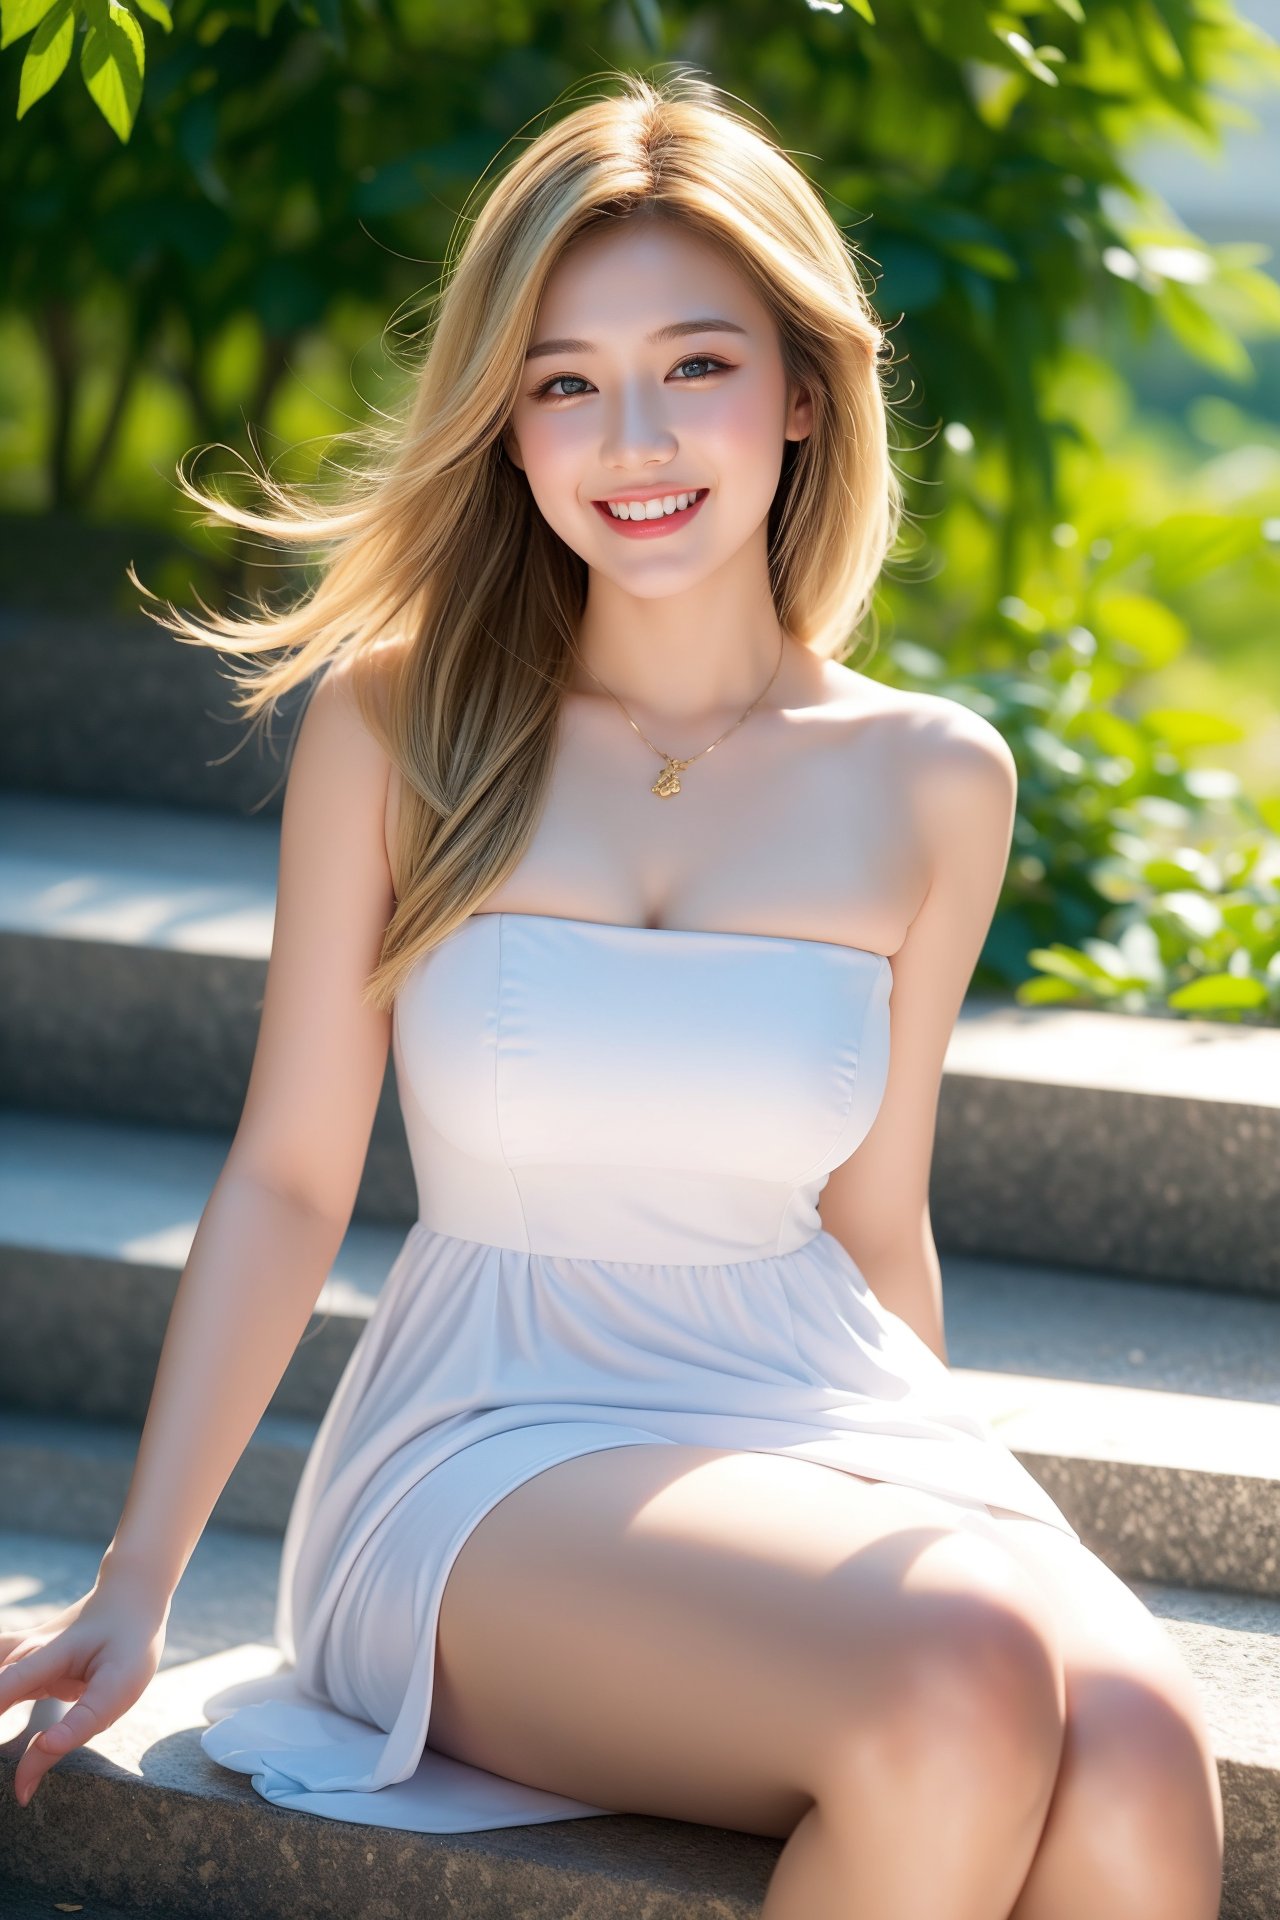 A young alluring girl, with a bright sun shining behind her. A stunning high-definition image of a beautiful young woman with blonde shoulder-length hair, dressed in casual summer clothes. She is seated on a set of stairs, her smile radiating joy and contentment. The sun casts a warm, golden glow on her skin, and its rays dance through the summer foliage above. The atmosphere is filled with the vibrancy and warmth of a perfect summer day, with a sense of peace and happiness enveloping the scene.,girlvn